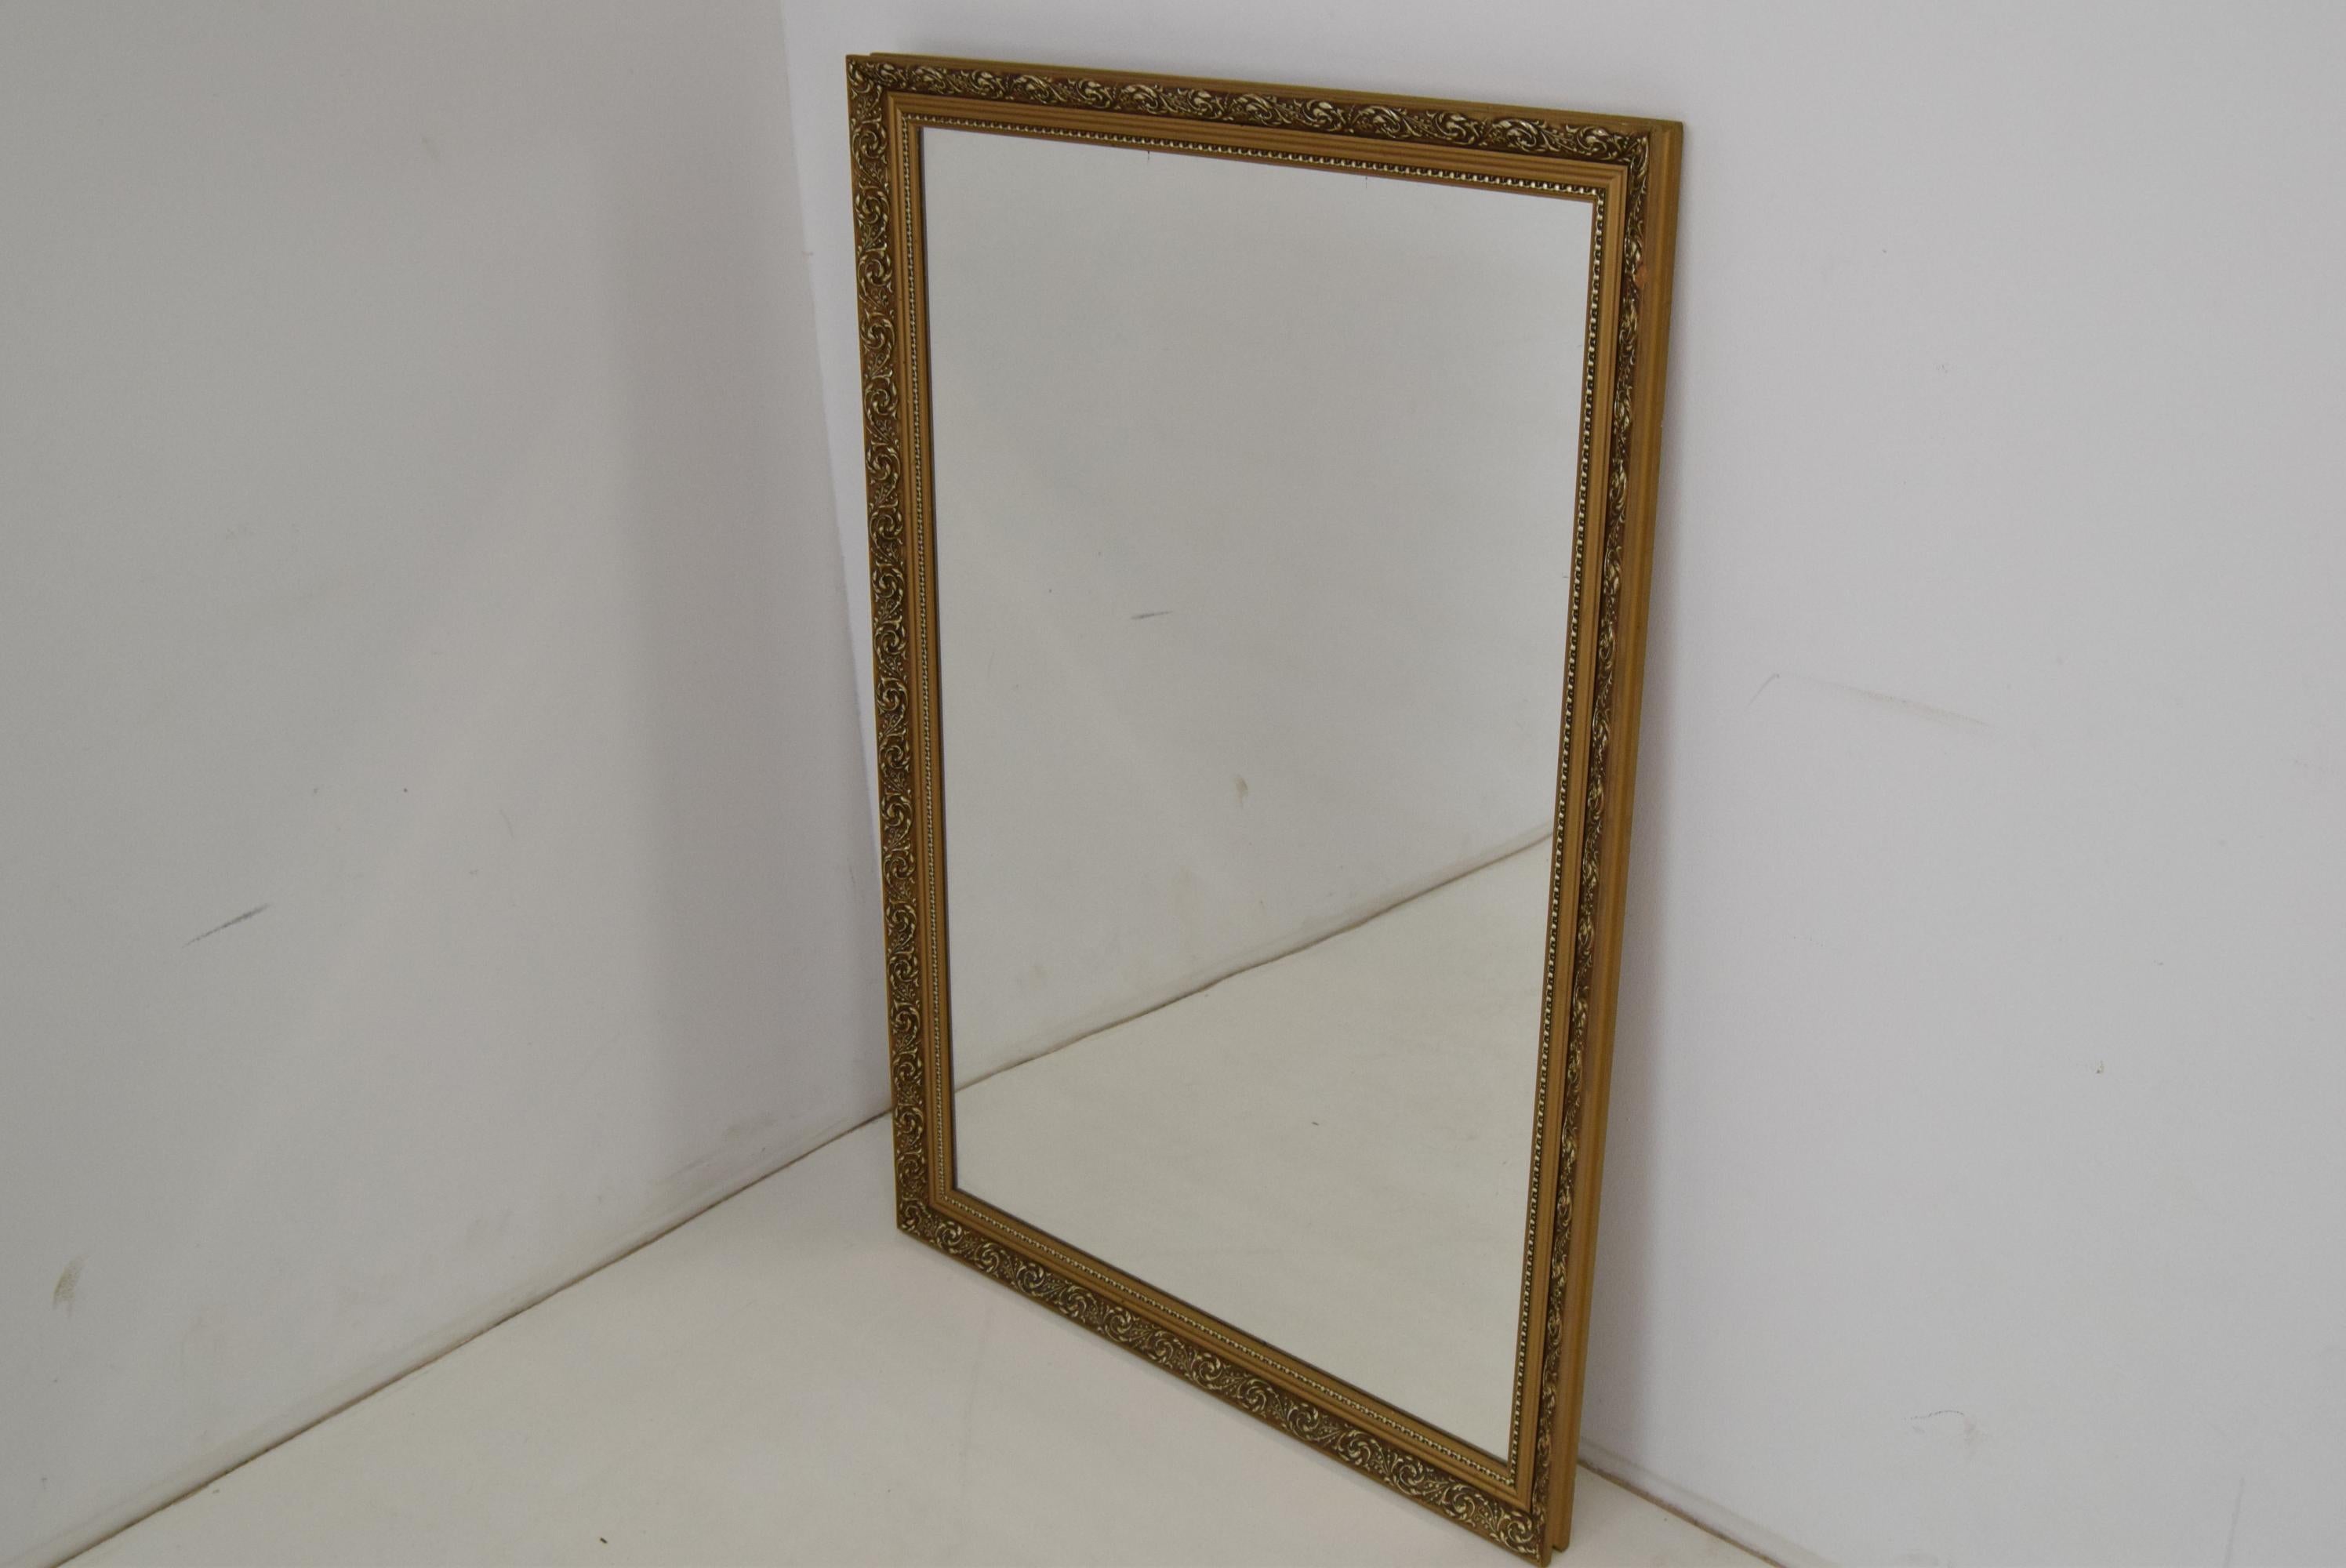 Made in Czechoslovakia
Made of mirror, wood
Re-polished 
Original condition.
 